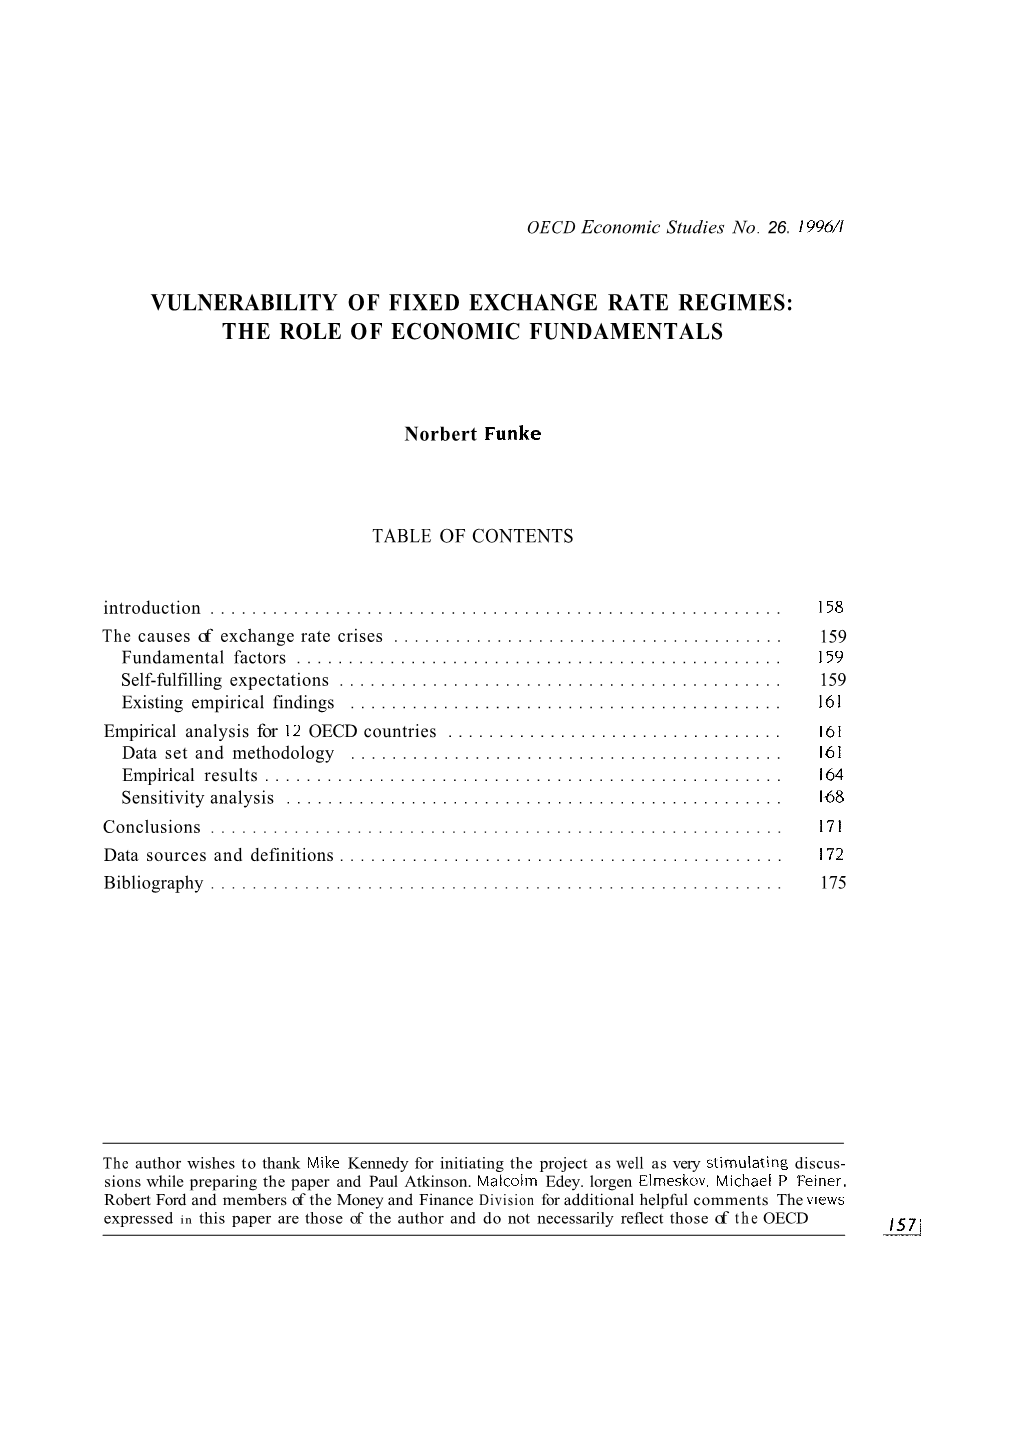 Vulnerability of Fixed Exchange Rate Regimes: the Role of Economic Fundamentals